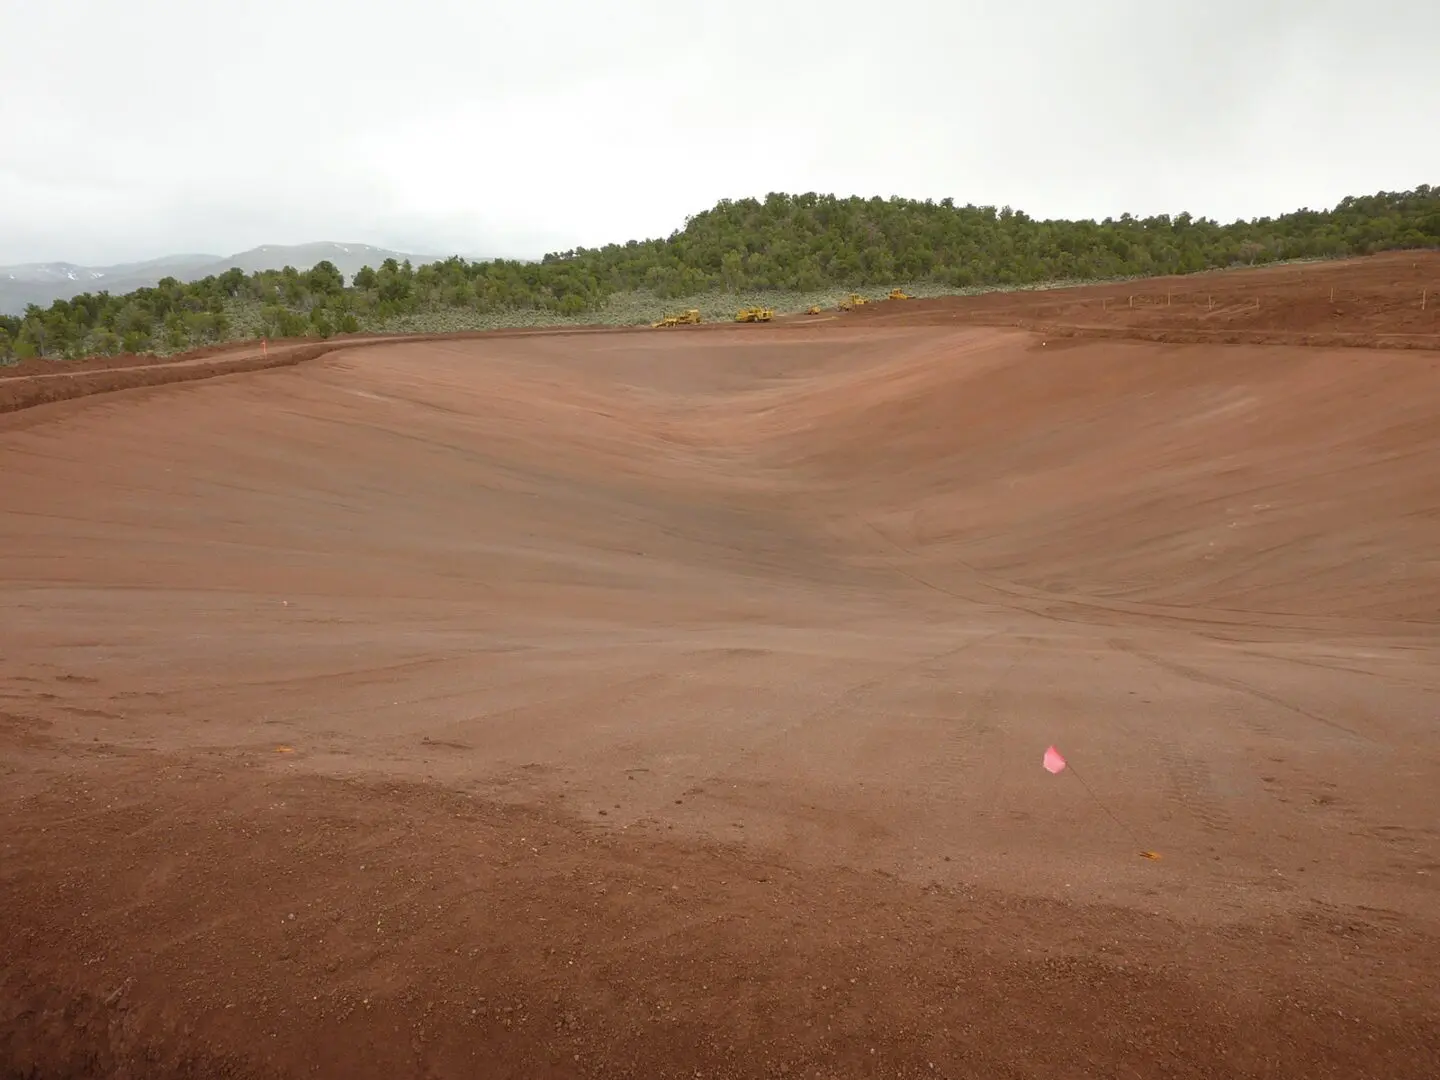 A red ball is in the middle of a dirt field.